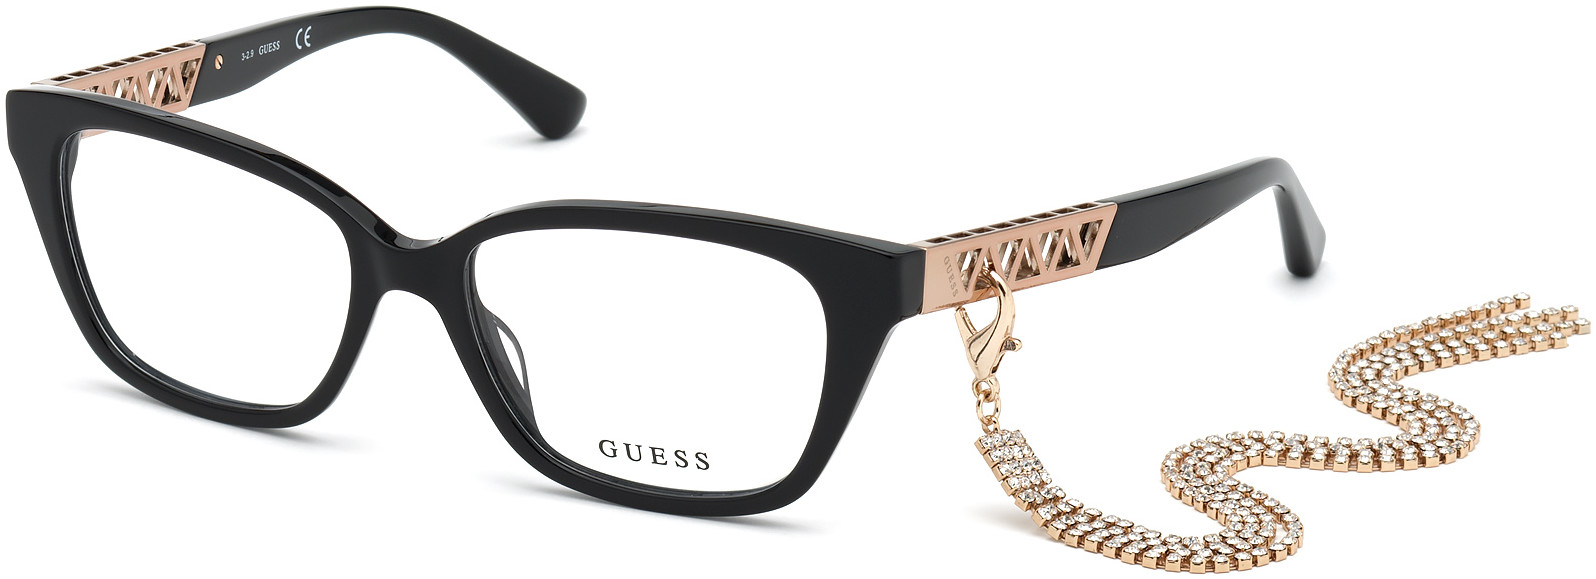 GUESS 2784 001